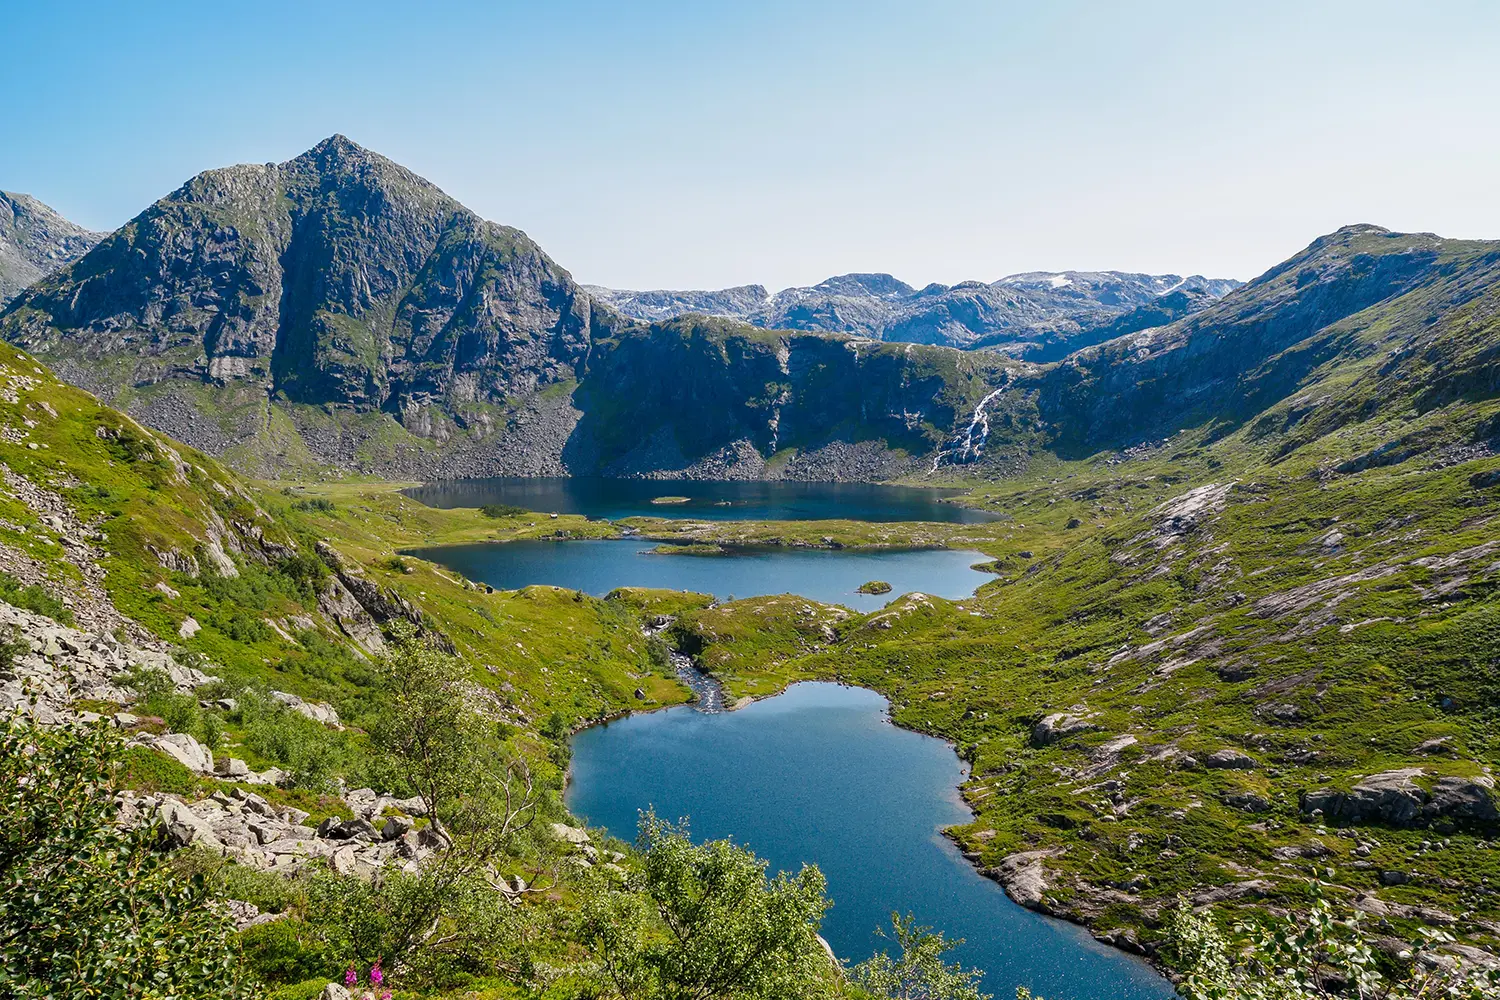 View of mountains and lakes in Folgefonna National Park near Rosendal village, Norway